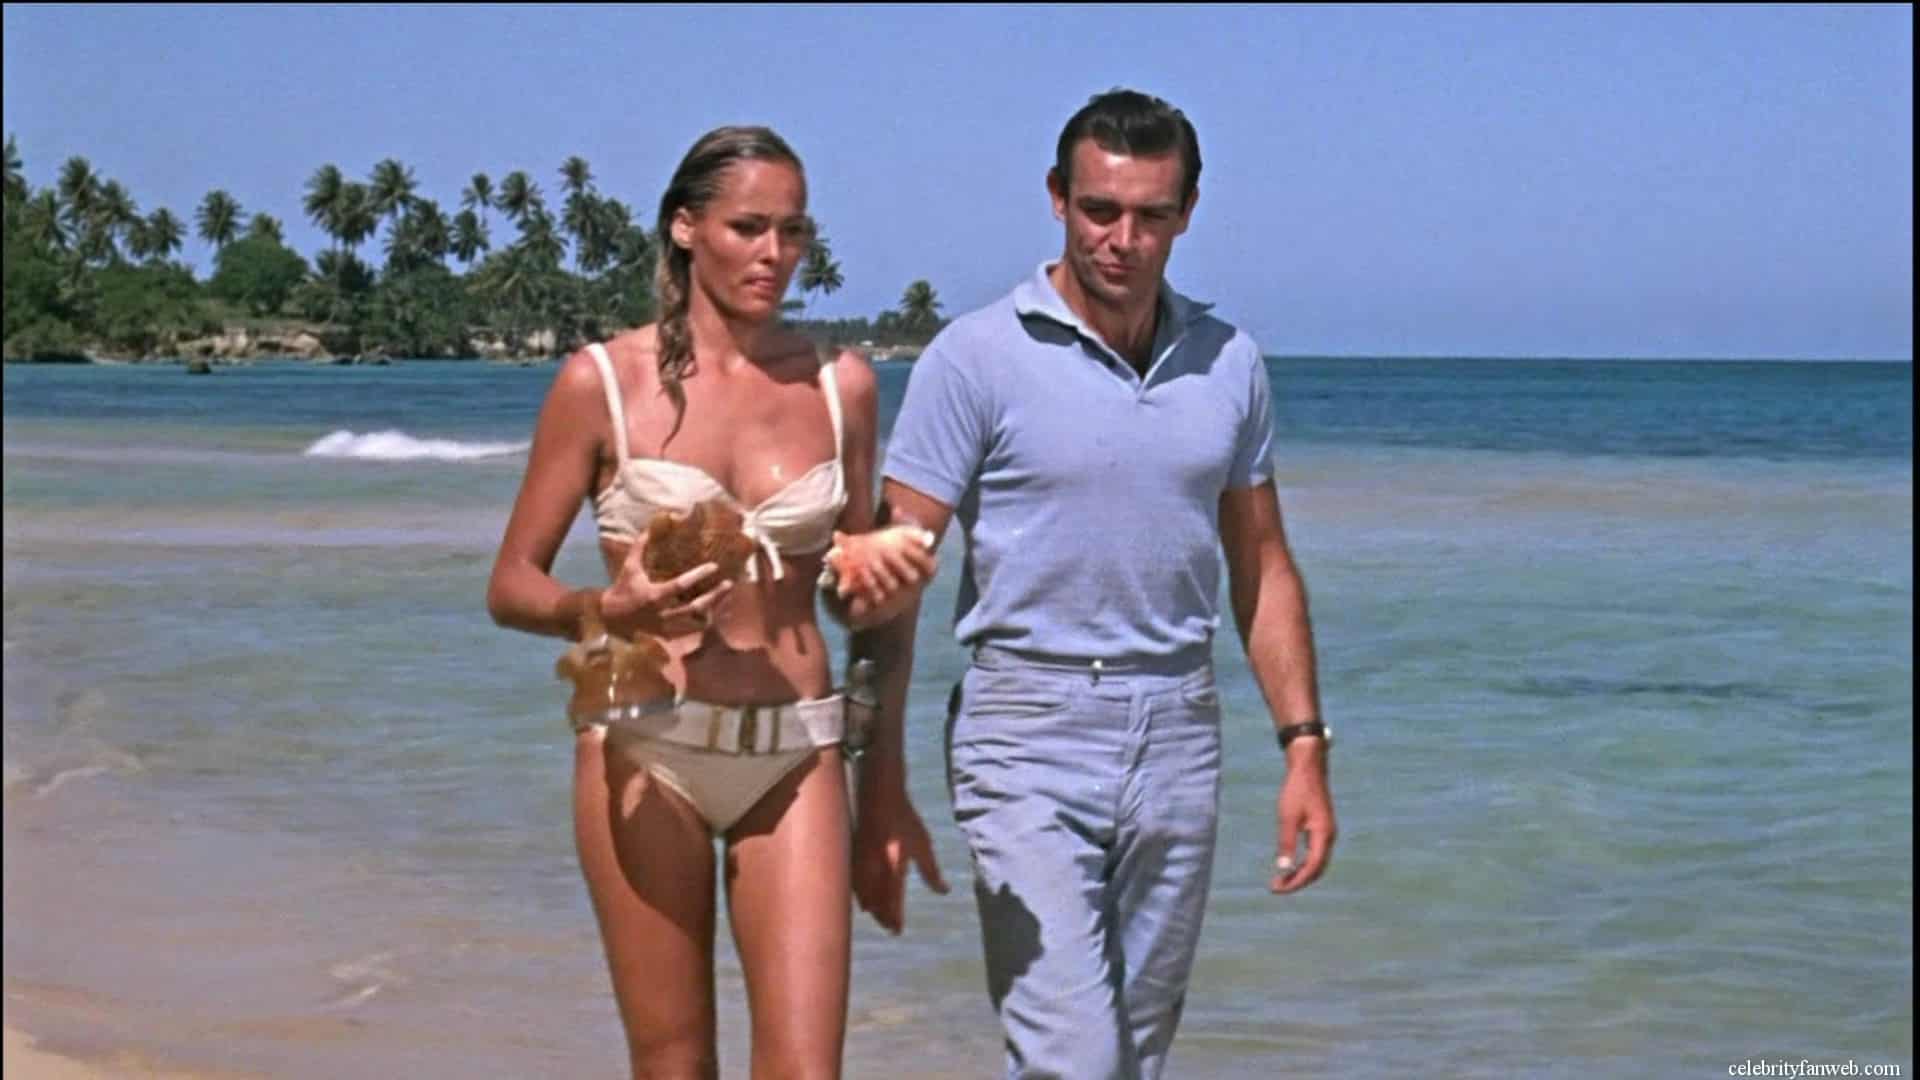 Top 22 Best Island Movies | Dr. No